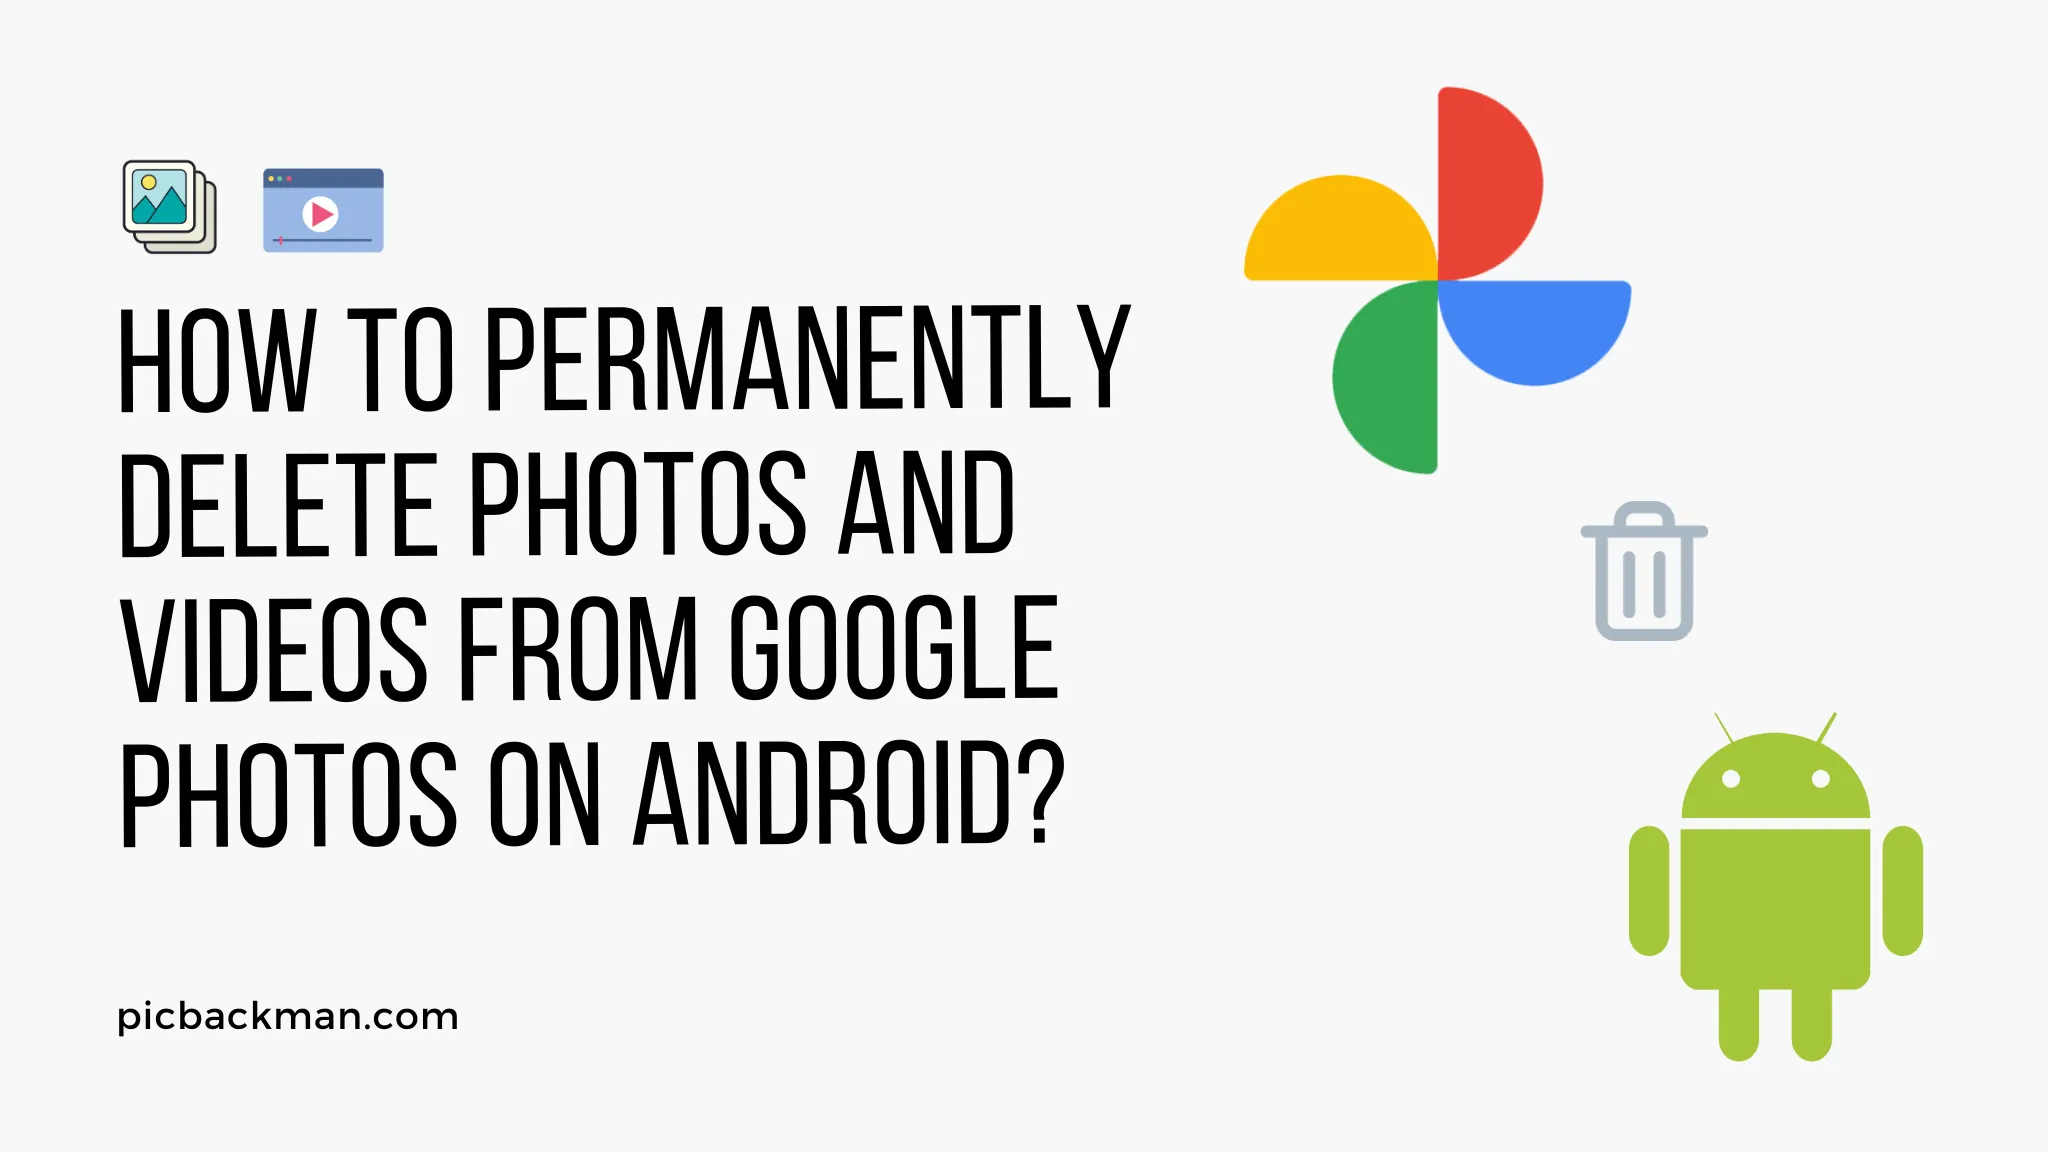 How to Permanently Delete Photos and Videos from Google Photos on Android?